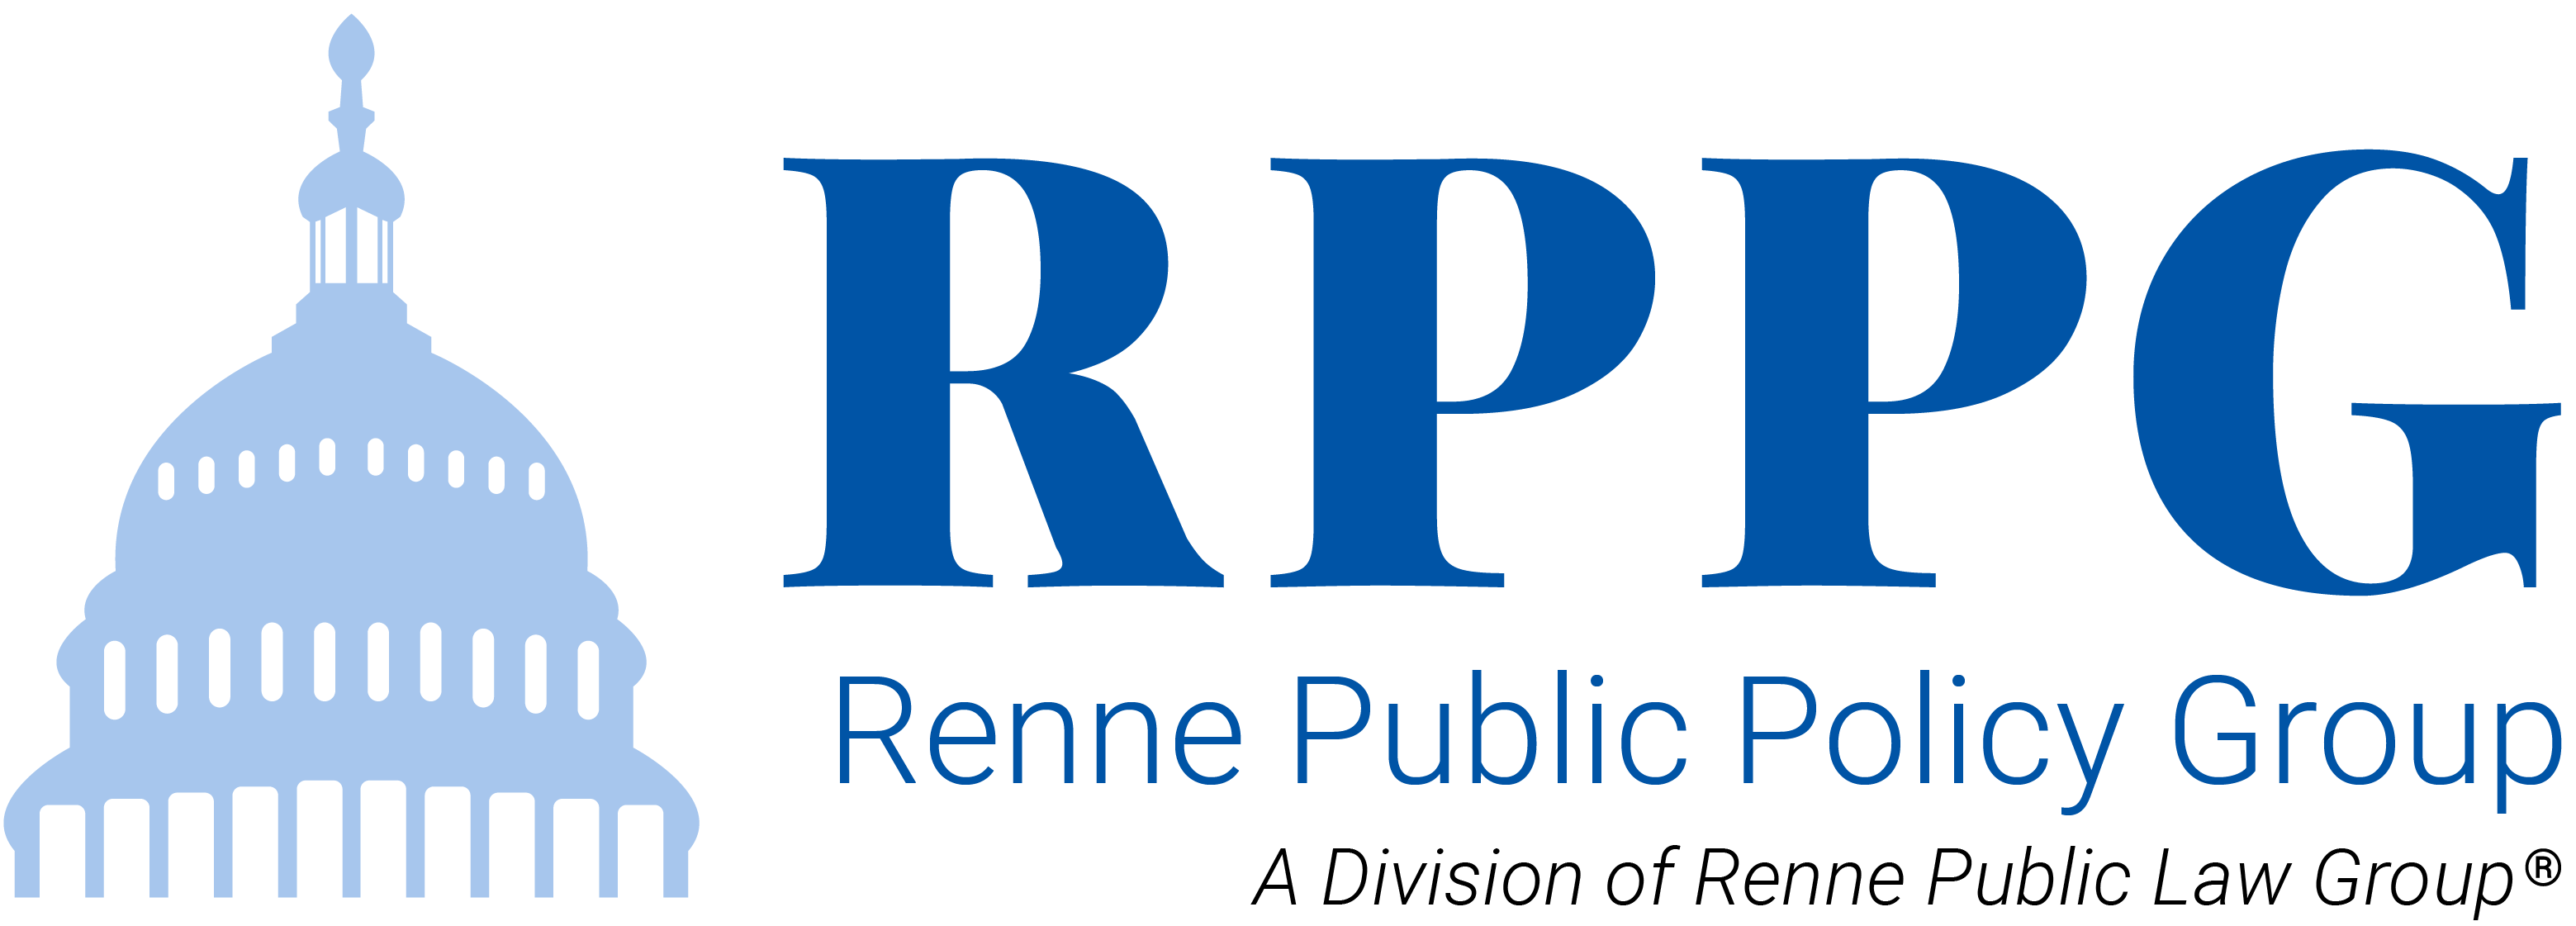 Renne Public Policy Group logo (RPPG)